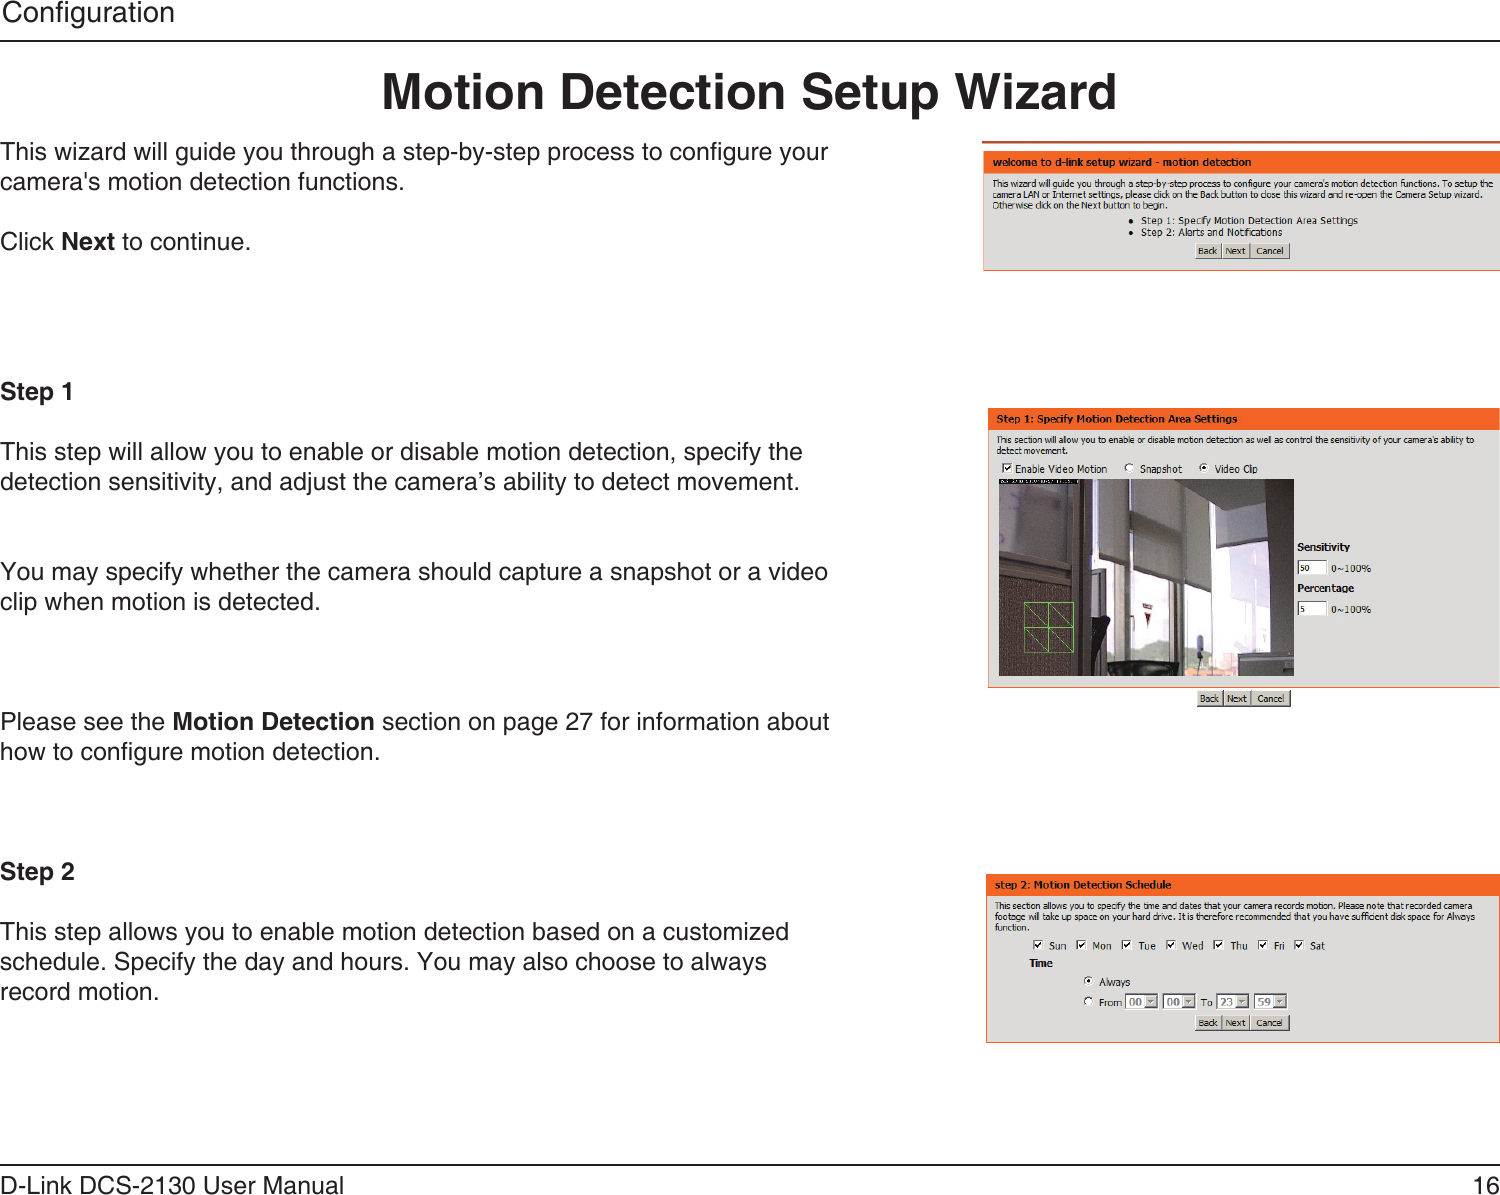 16D-Link DCS-2130 User ManualCongurationThis wizard will guide you through a step-by-step process to congure your camera&apos;s motion detection functions.Click Next to continue.Step 1This step will allow you to enable or disable motion detection, specify the detection sensitivity, and adjust the camera’s ability to detect movement.You may specify whether the camera should capture a snapshot or a video clip when motion is detected.Please see the Motion Detection section on page 27 for information about how to congure motion detection.Step 2This step allows you to enable motion detection based on a customized schedule. Specify the day and hours. You may also choose to always record motion.Motion Detection Setup Wizard